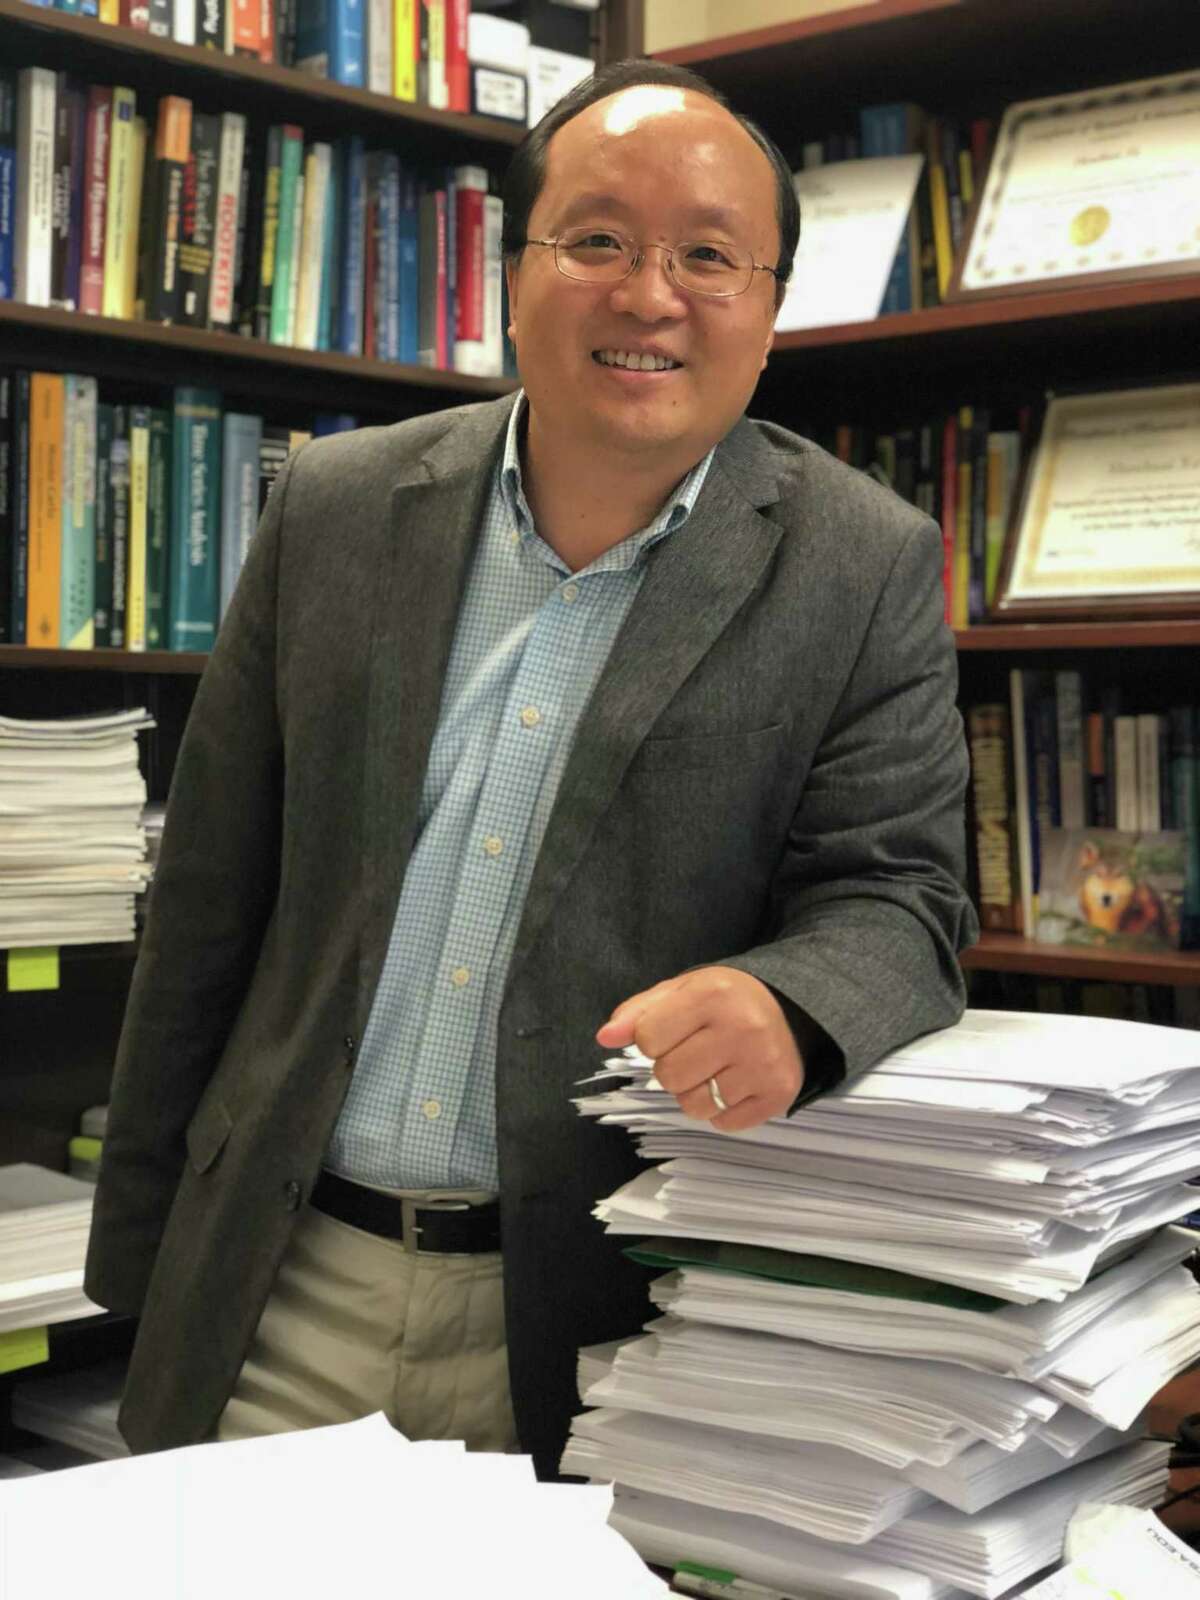 Shouhuai Xu is the director of the Laboratory for Cybersecurity Dynamics at the University of Texas at San Antonio.